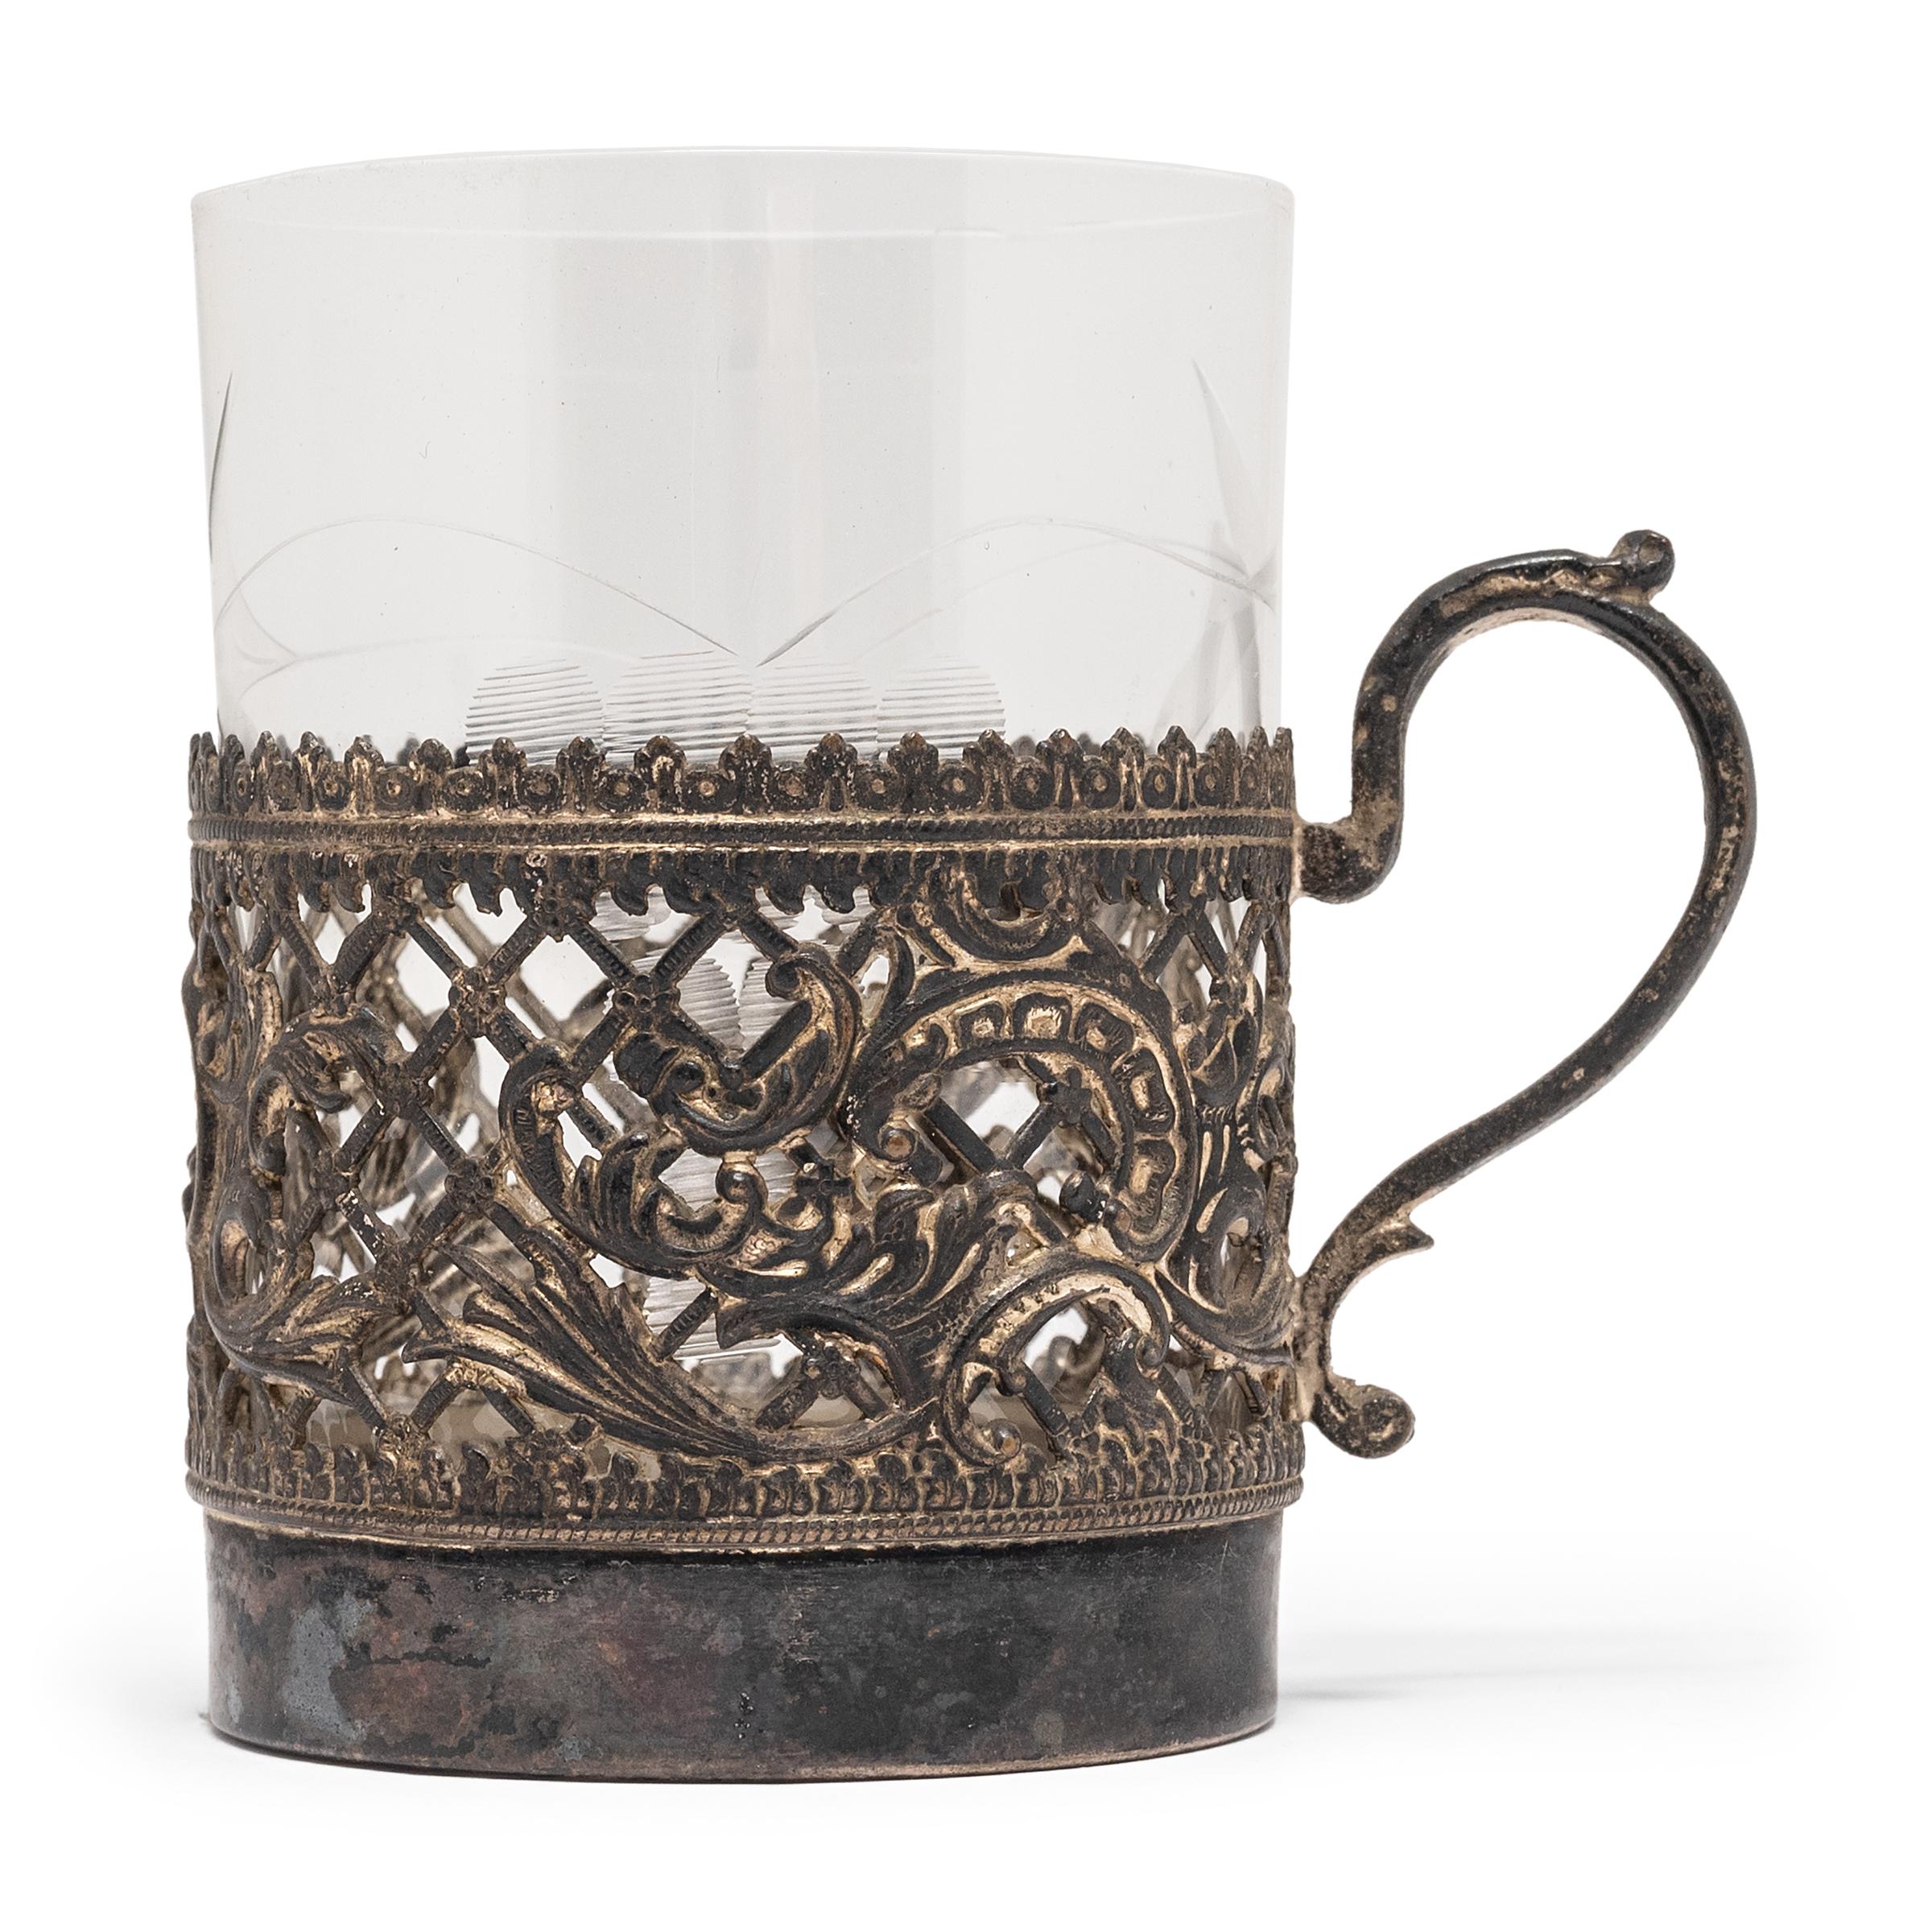 This 20th century European silver cup holder, set with a glass tumbler, boasts an exquisitely detailed filigree mount and scrolled handle. Relics of ancient filigree design have been found in Mesopotamia, dating the pressed metal technique as far